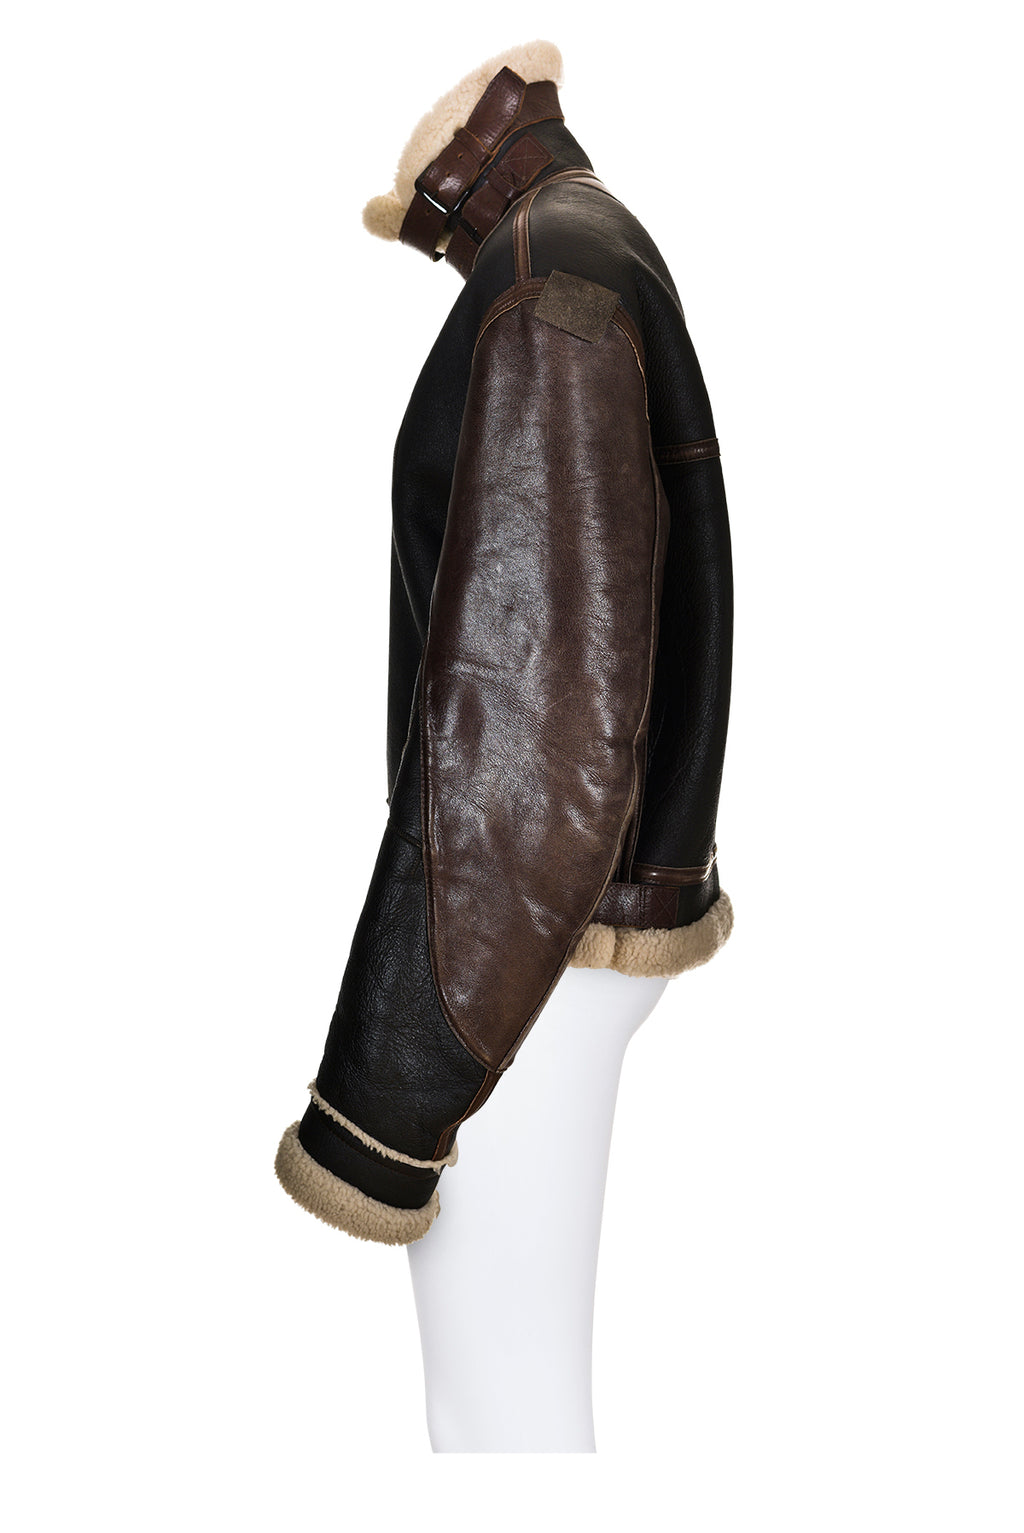 Christopher Nemeth Shearling Jacket, 1980s or 1990s